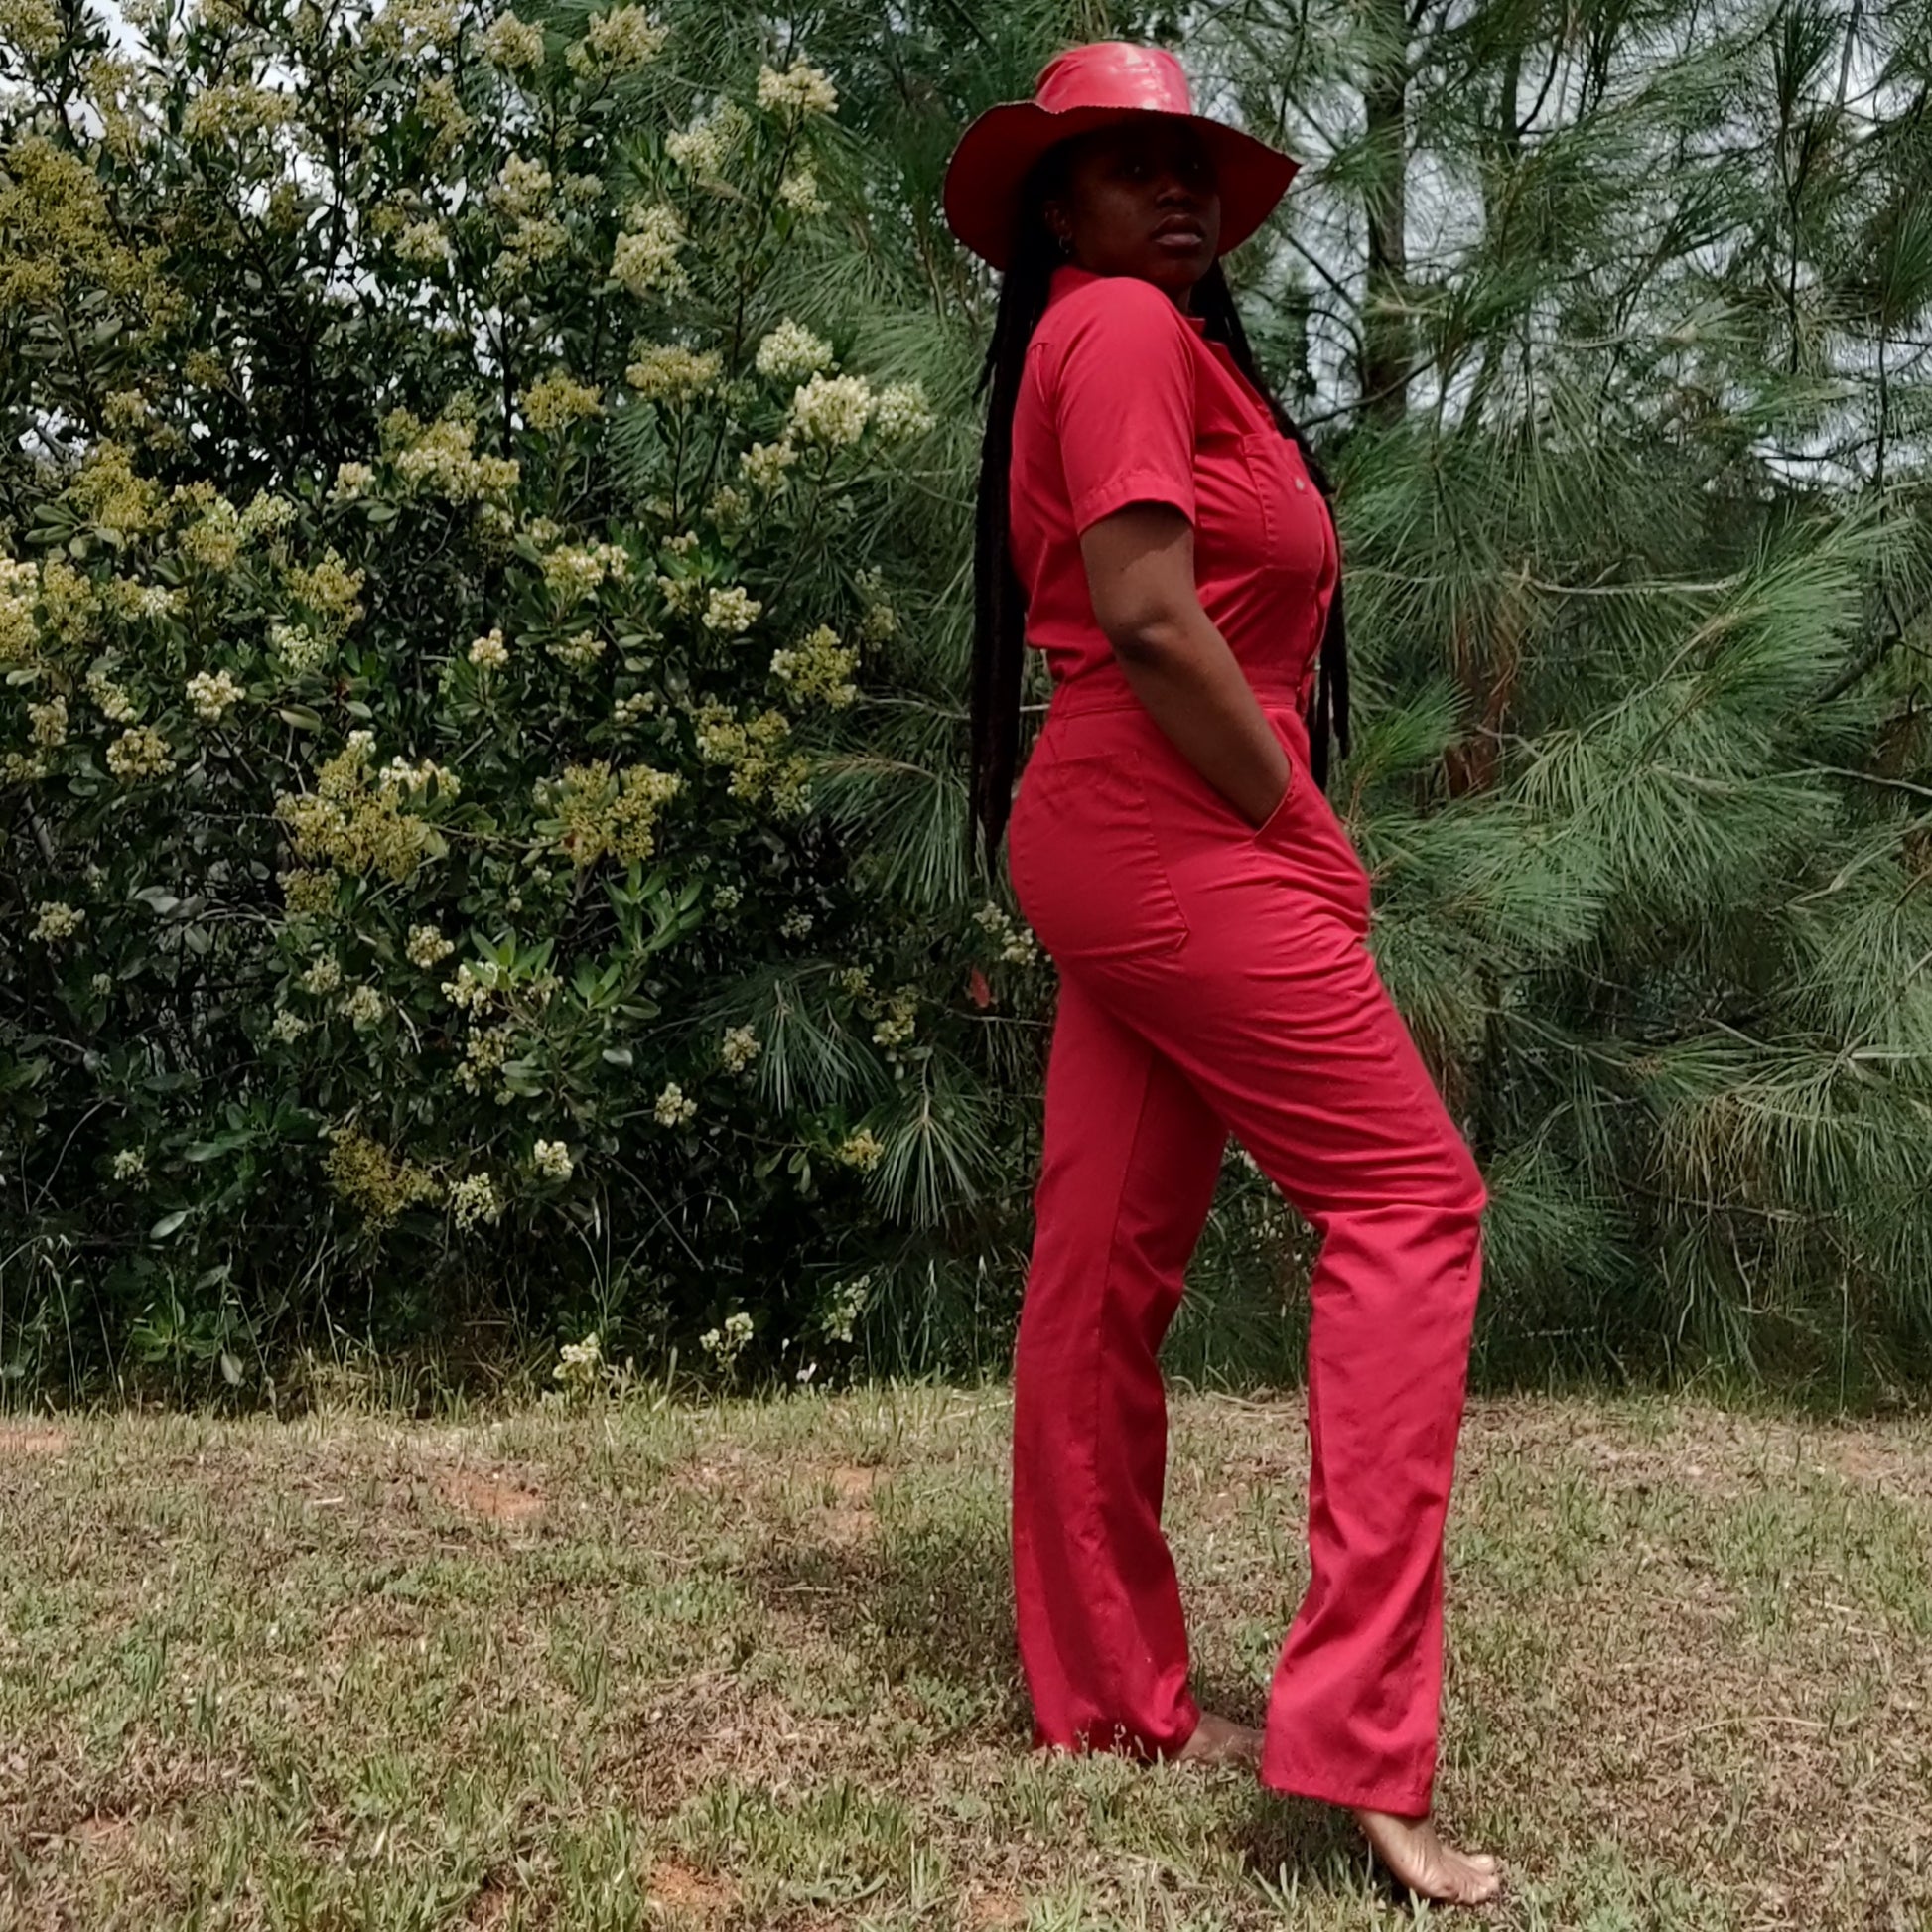 Red Leather Hat on woman